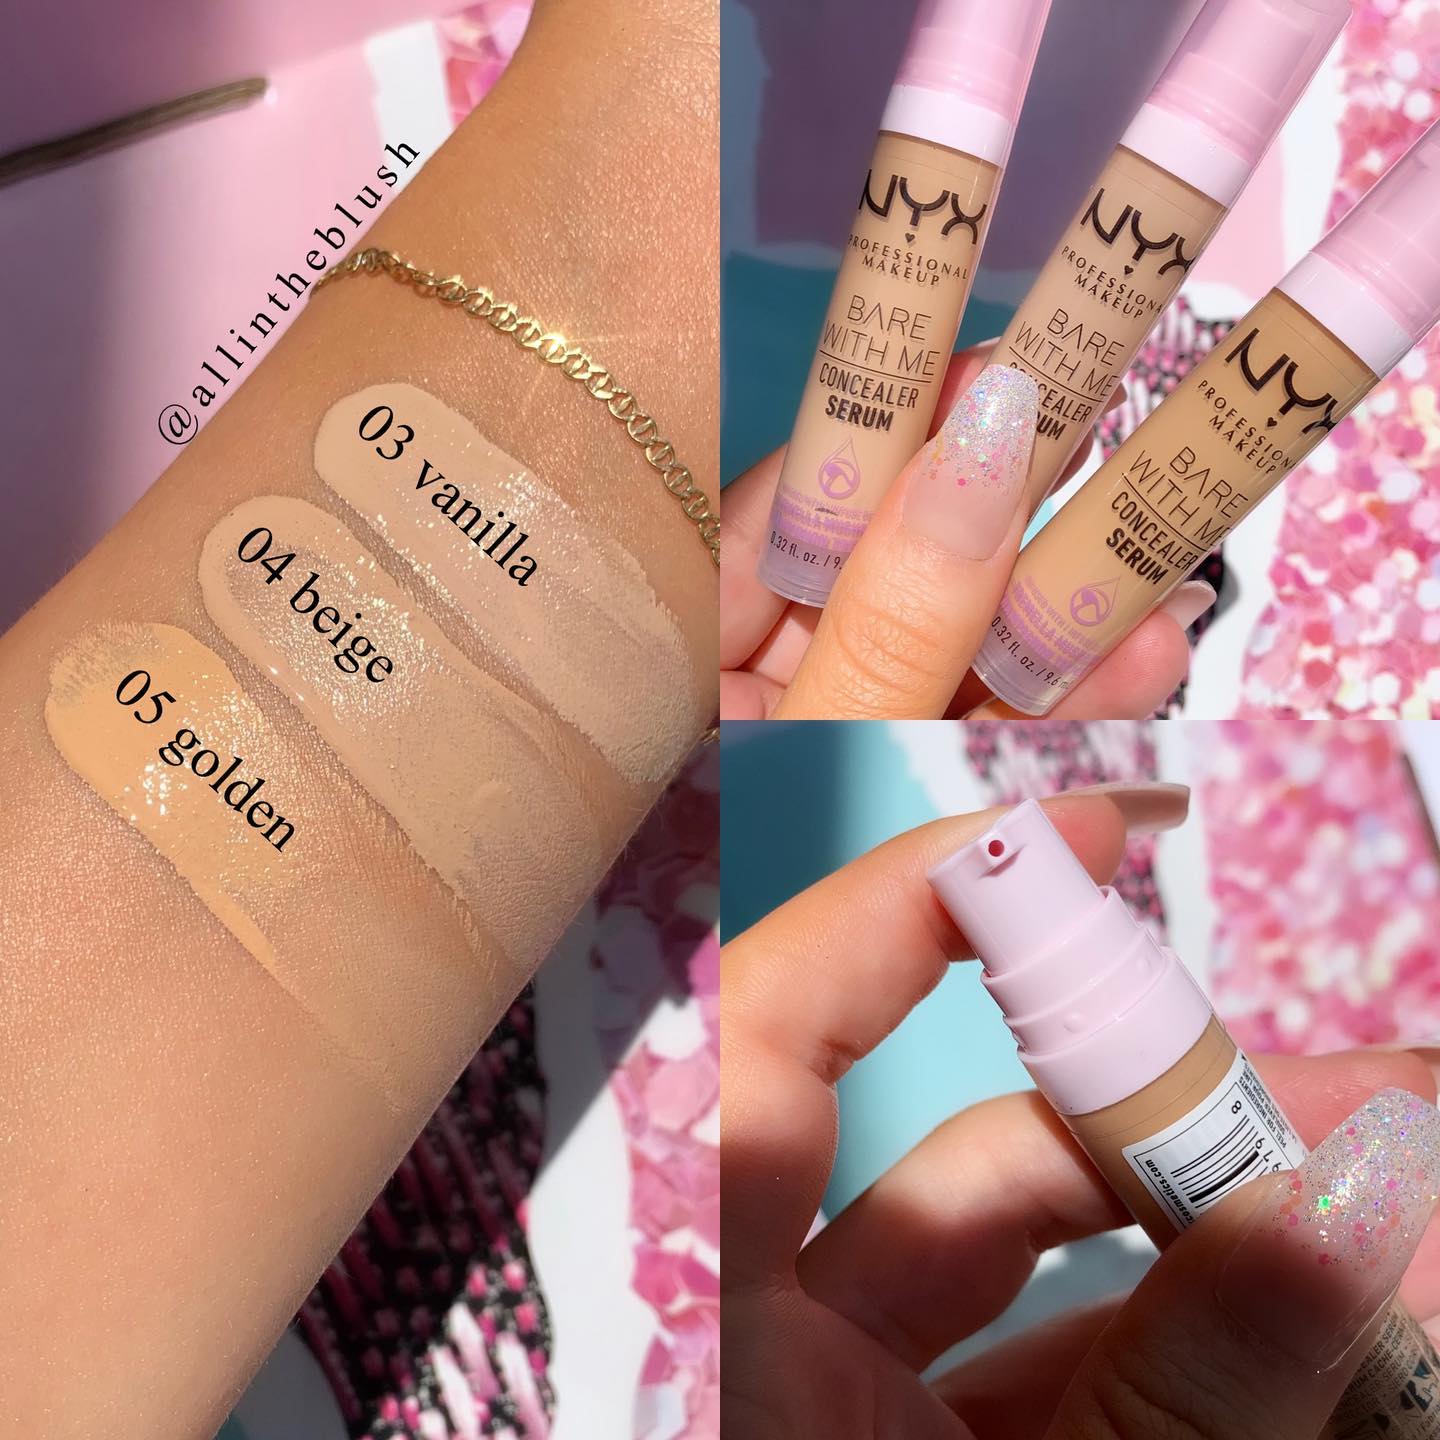 nyx coverage concealer review